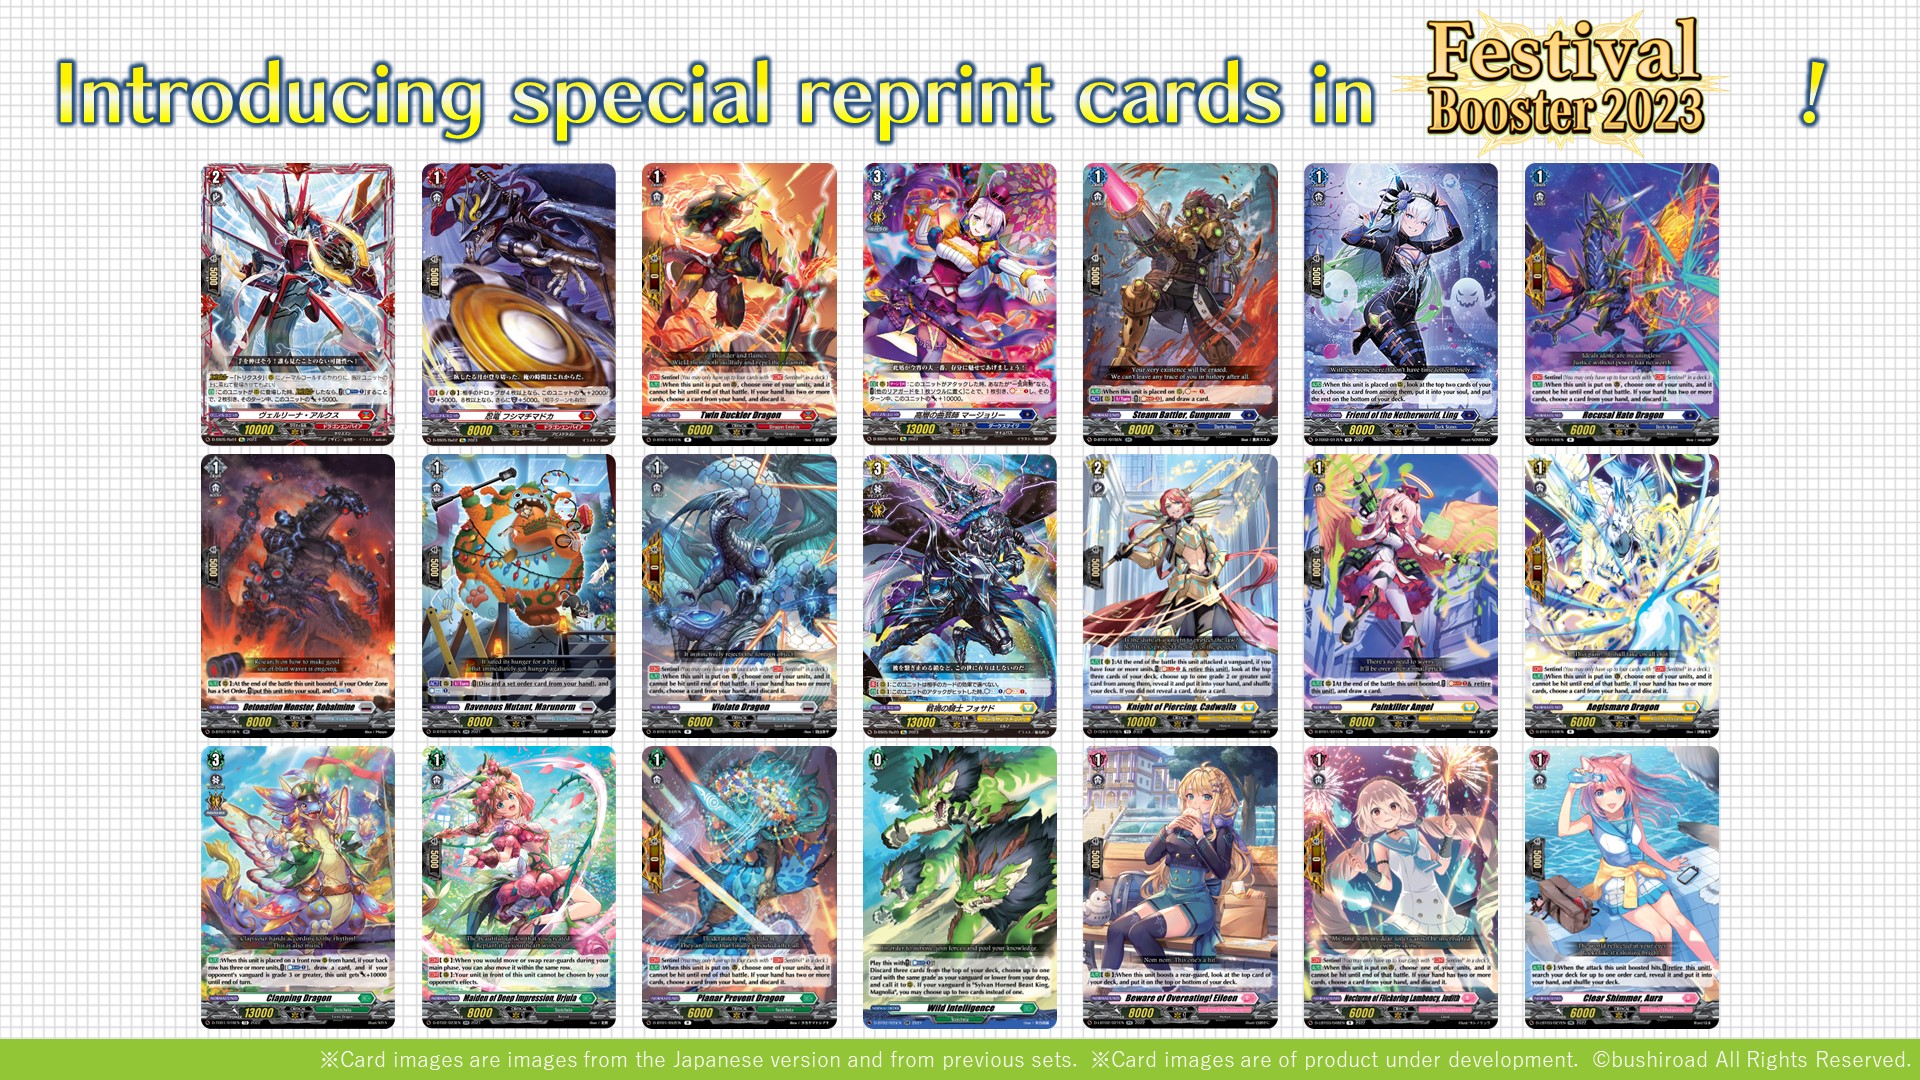 Cardfight!! Vanguard Special Series 05 Festival Booster 2023